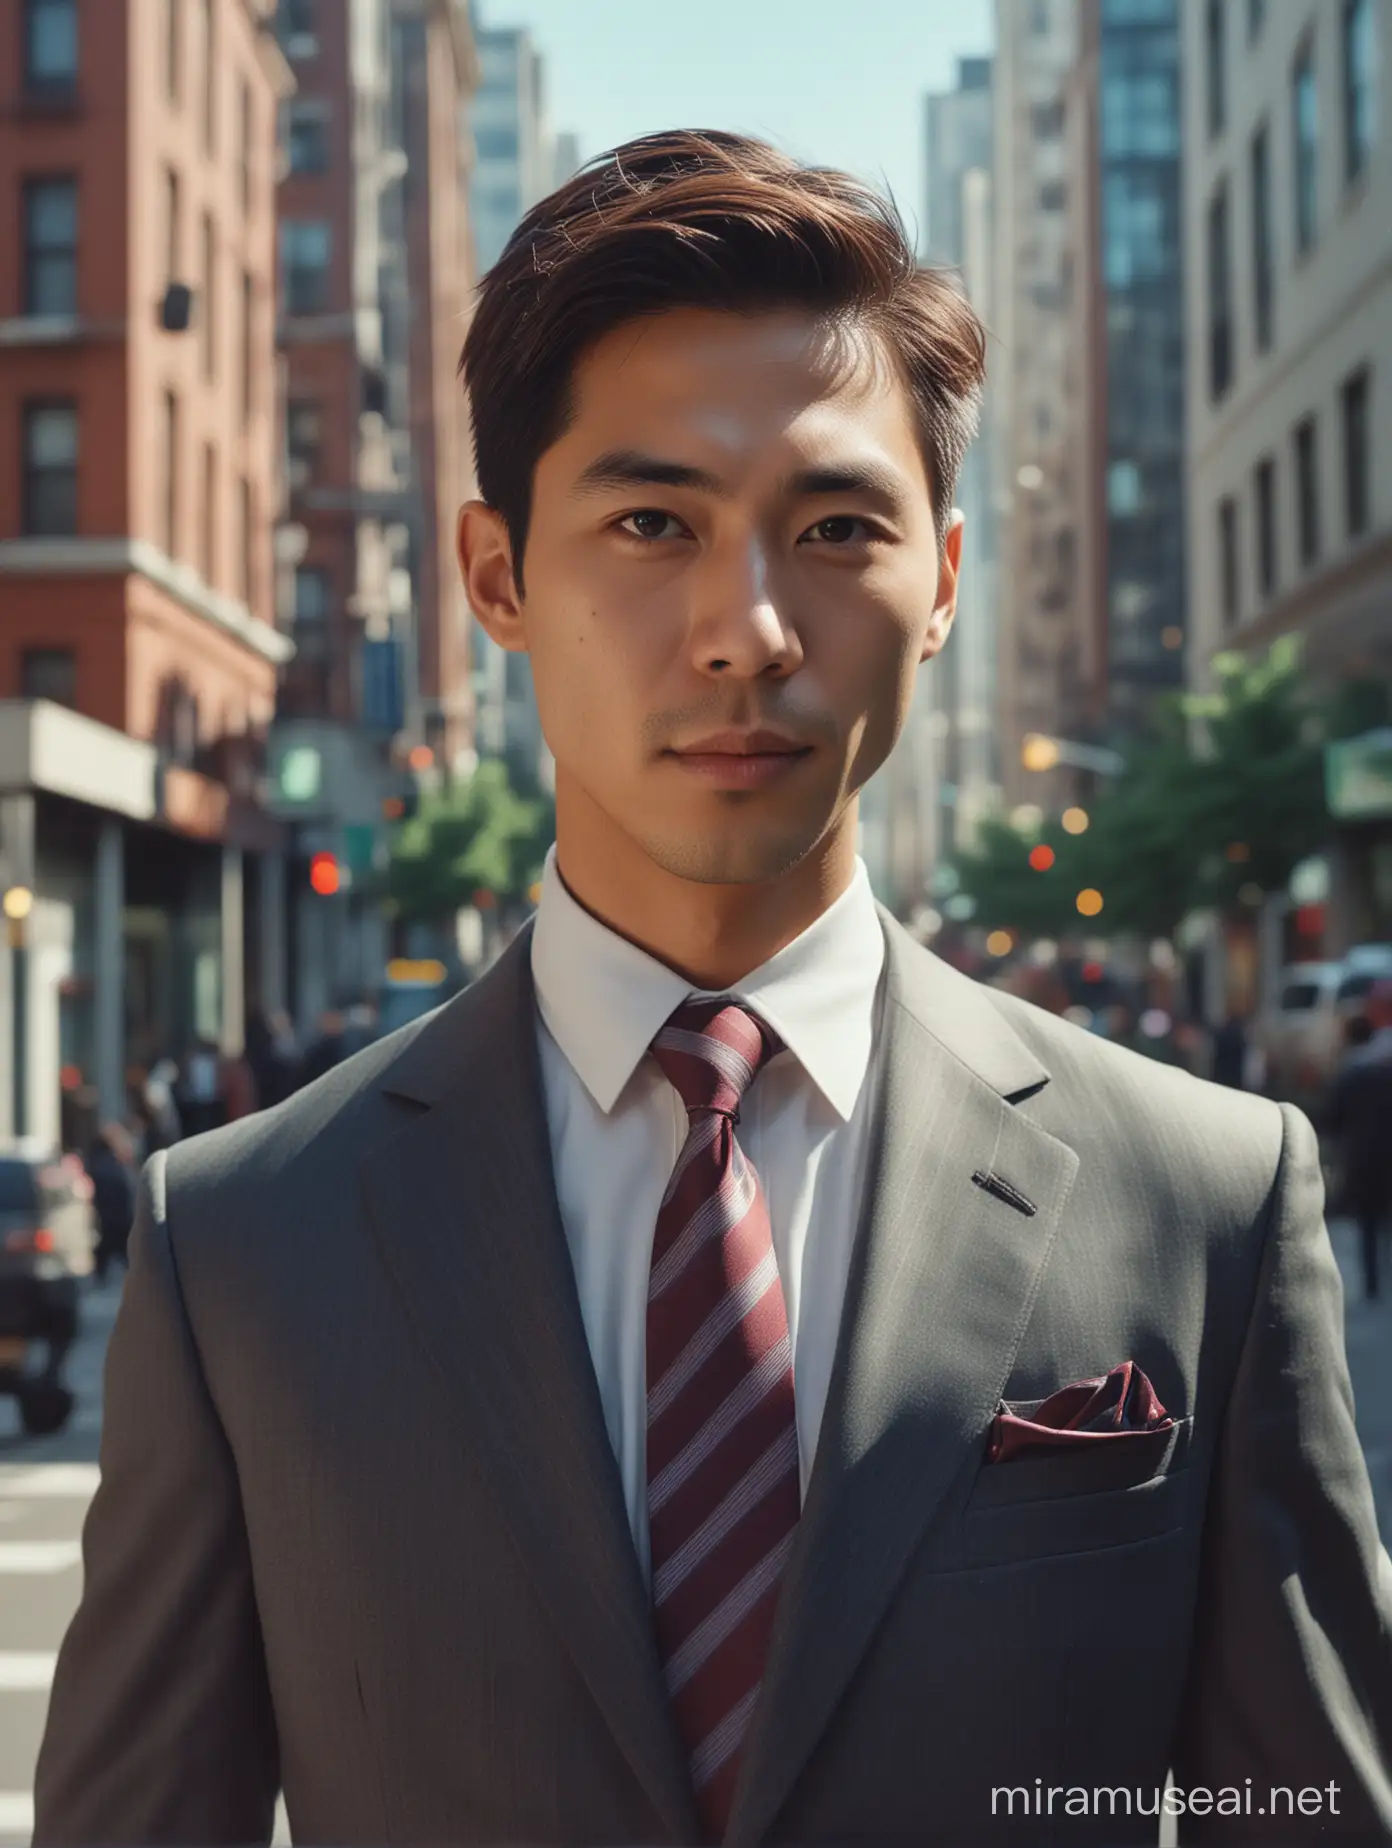 Asian Businessman in High Definition Cinematic Suit and Tie Portrait